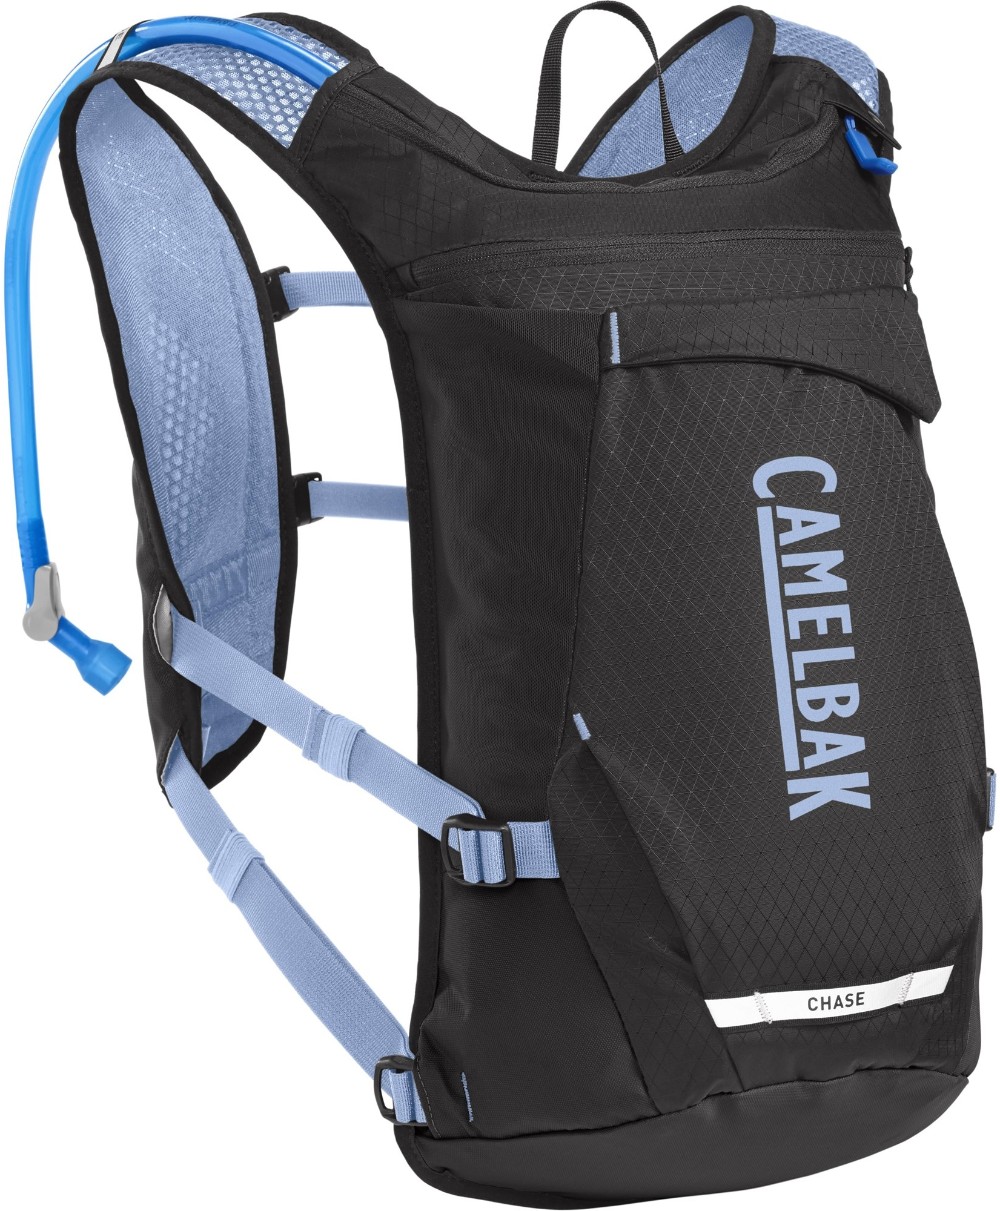 Chase Adventure Pack 8L Womens Hydration Vest with 2L Reservoir image 0